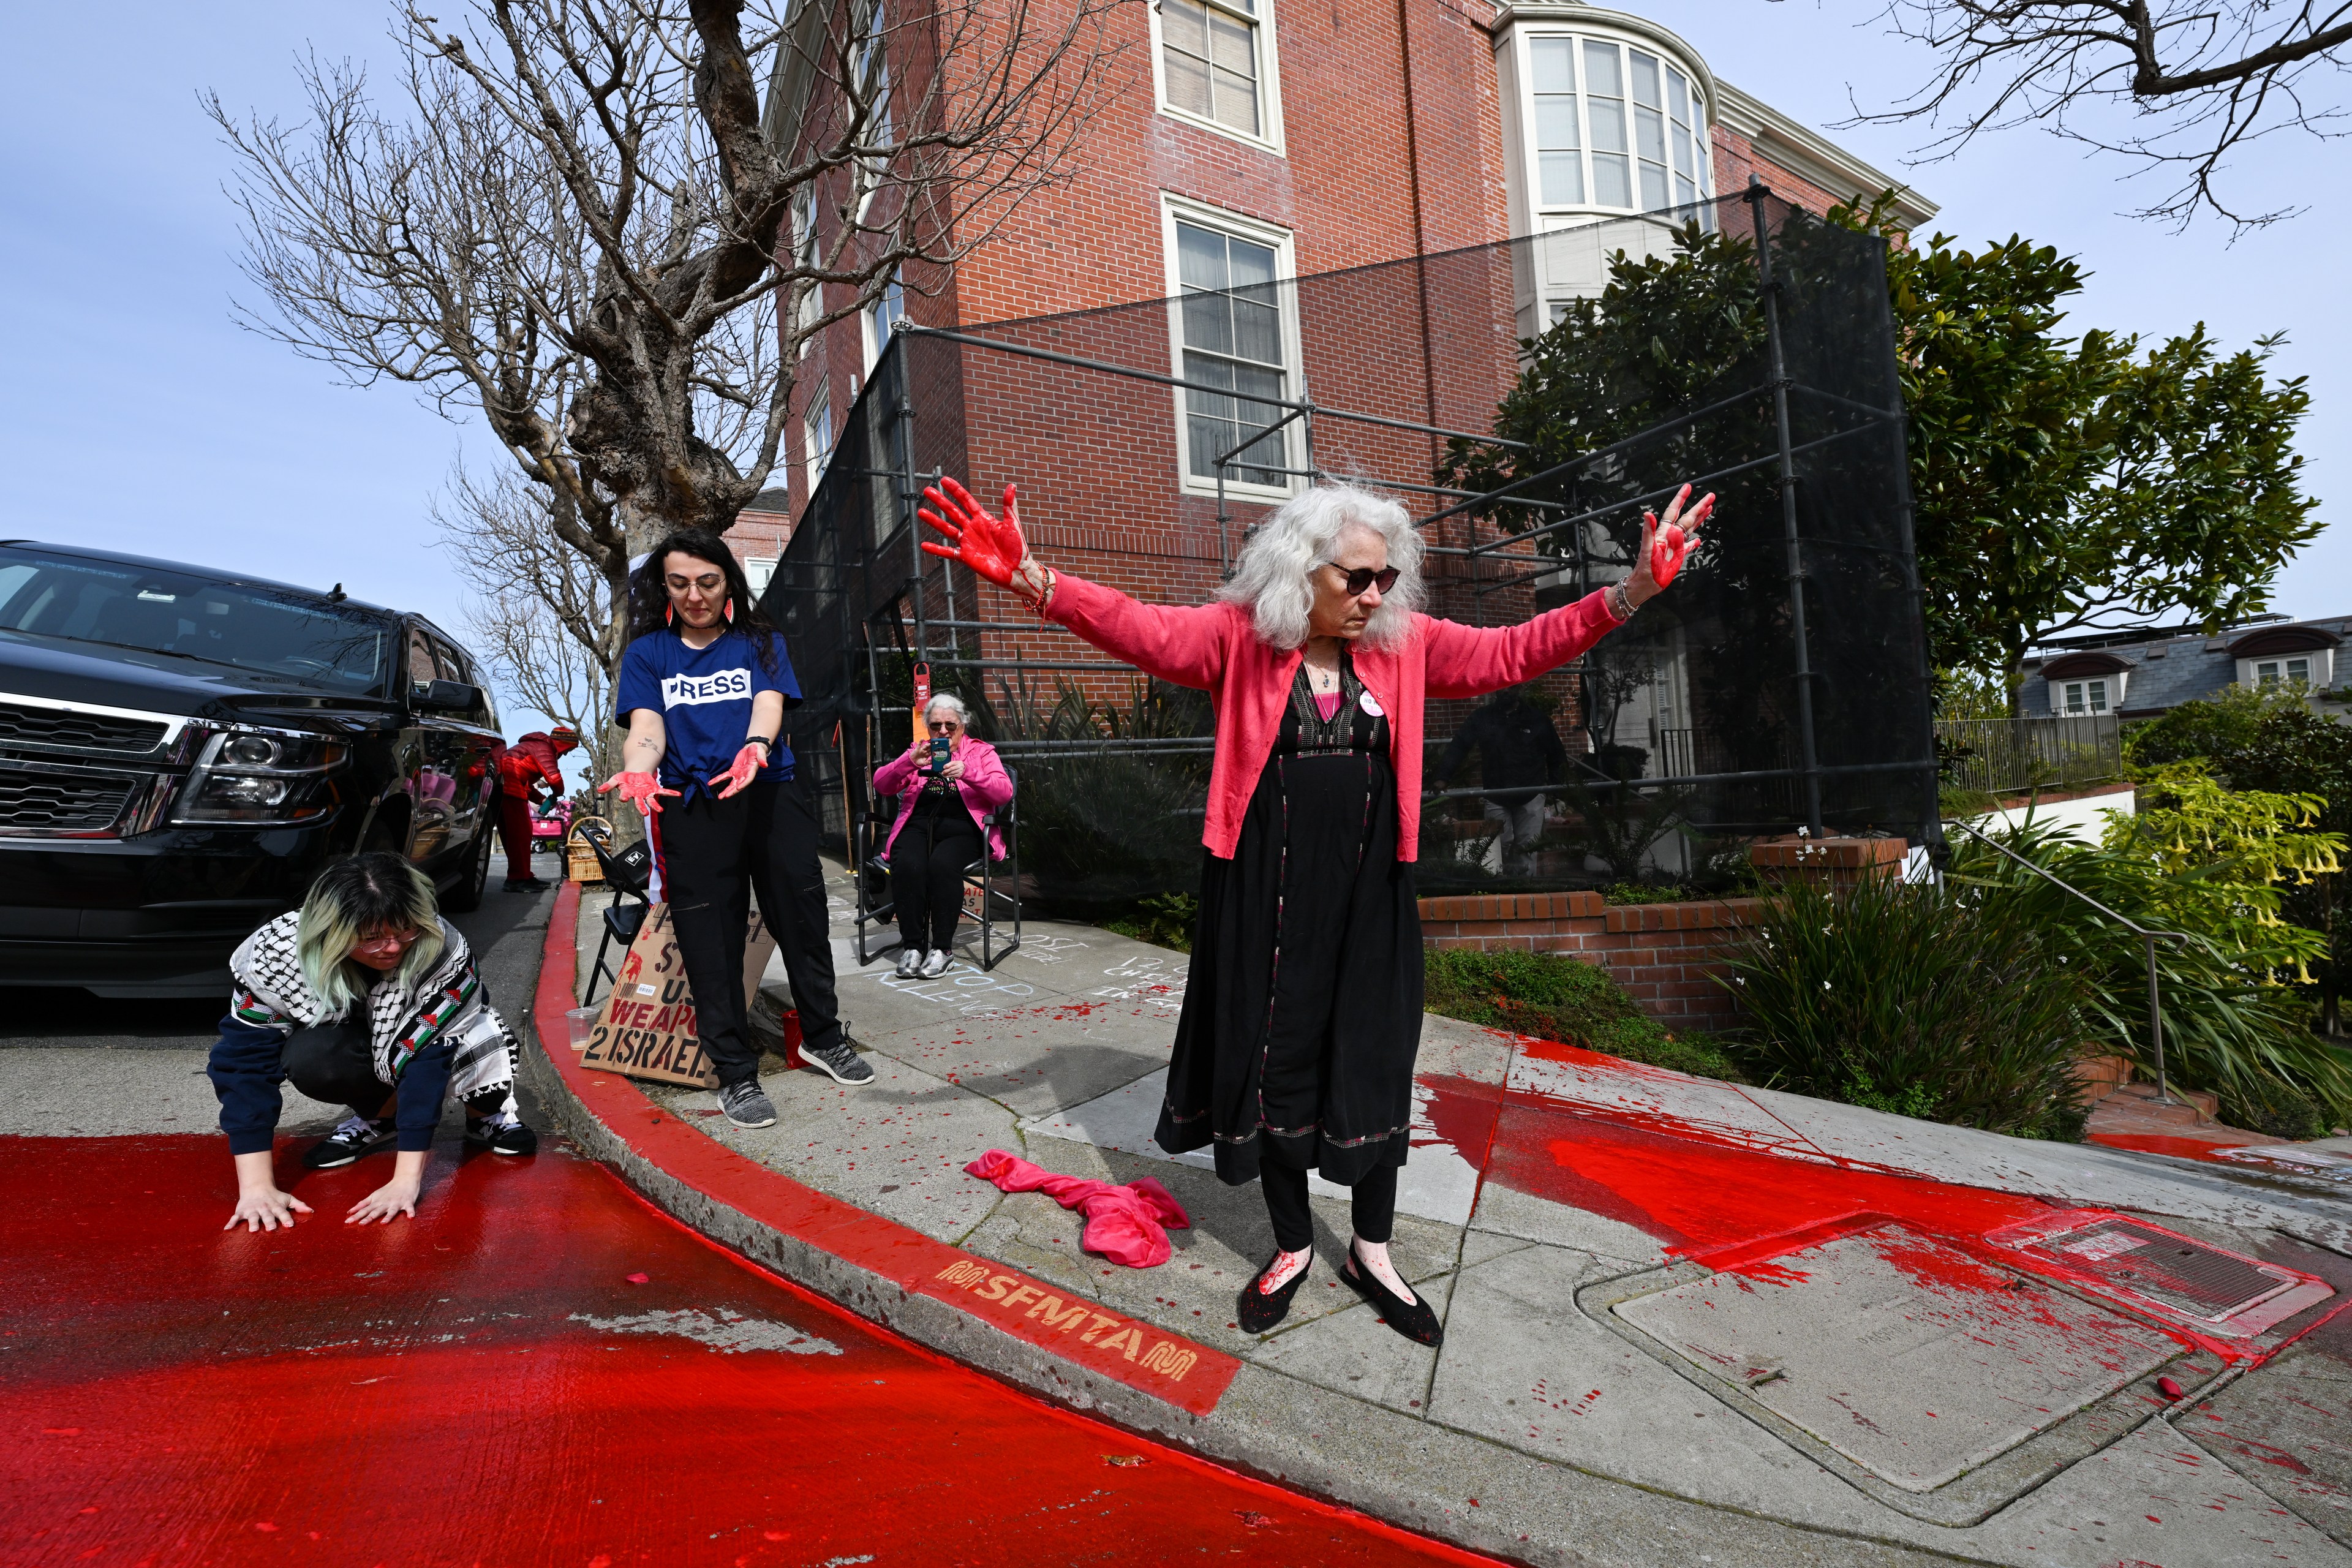 A woman with her hands raised in the air and red paint on the surrounding sidewalk